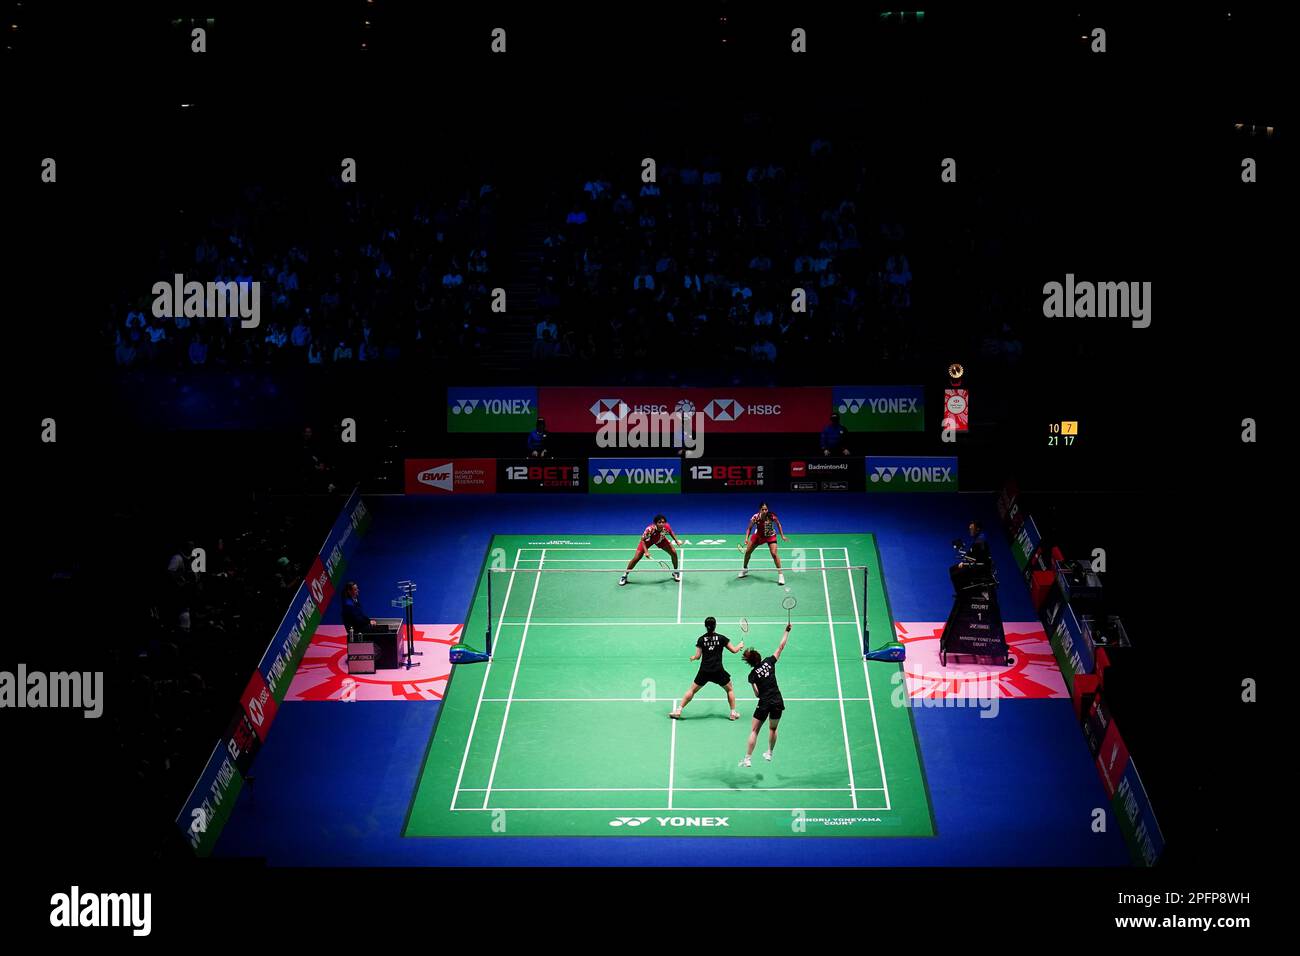 India's Treesa Jolly (top left) and Gayatri Gopichand Pullela (top right) in action against Korea's Baek Ha Na (bottom left) and Lee So Hee during day five of the YONEX All England Open Badminton Championships at the Utilita Arena Birmingham. Picture date: Saturday March 18, 2023. Stock Photo